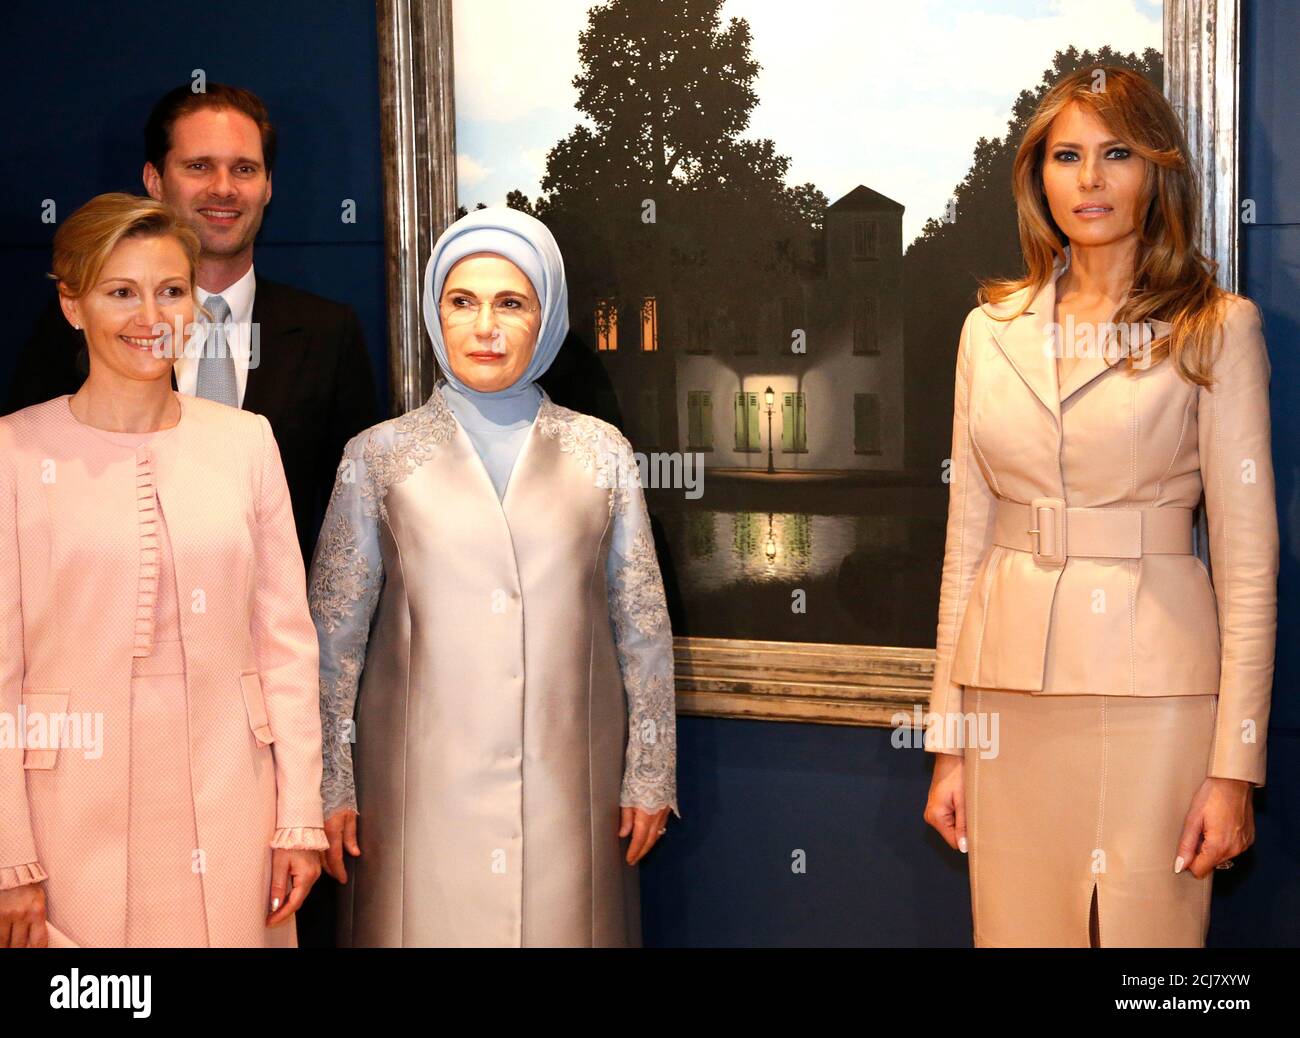 Luxembourg's Gauthier Destenay, Slovenia's Mojca Stropnik, Turkey's first  lady Emine Erdogan and U.S. first lady Melania Trump visit the Magritte  Museum in Brussels, May 25, 2017. REUTERS/Francois Lenoir Stock Photo -  Alamy